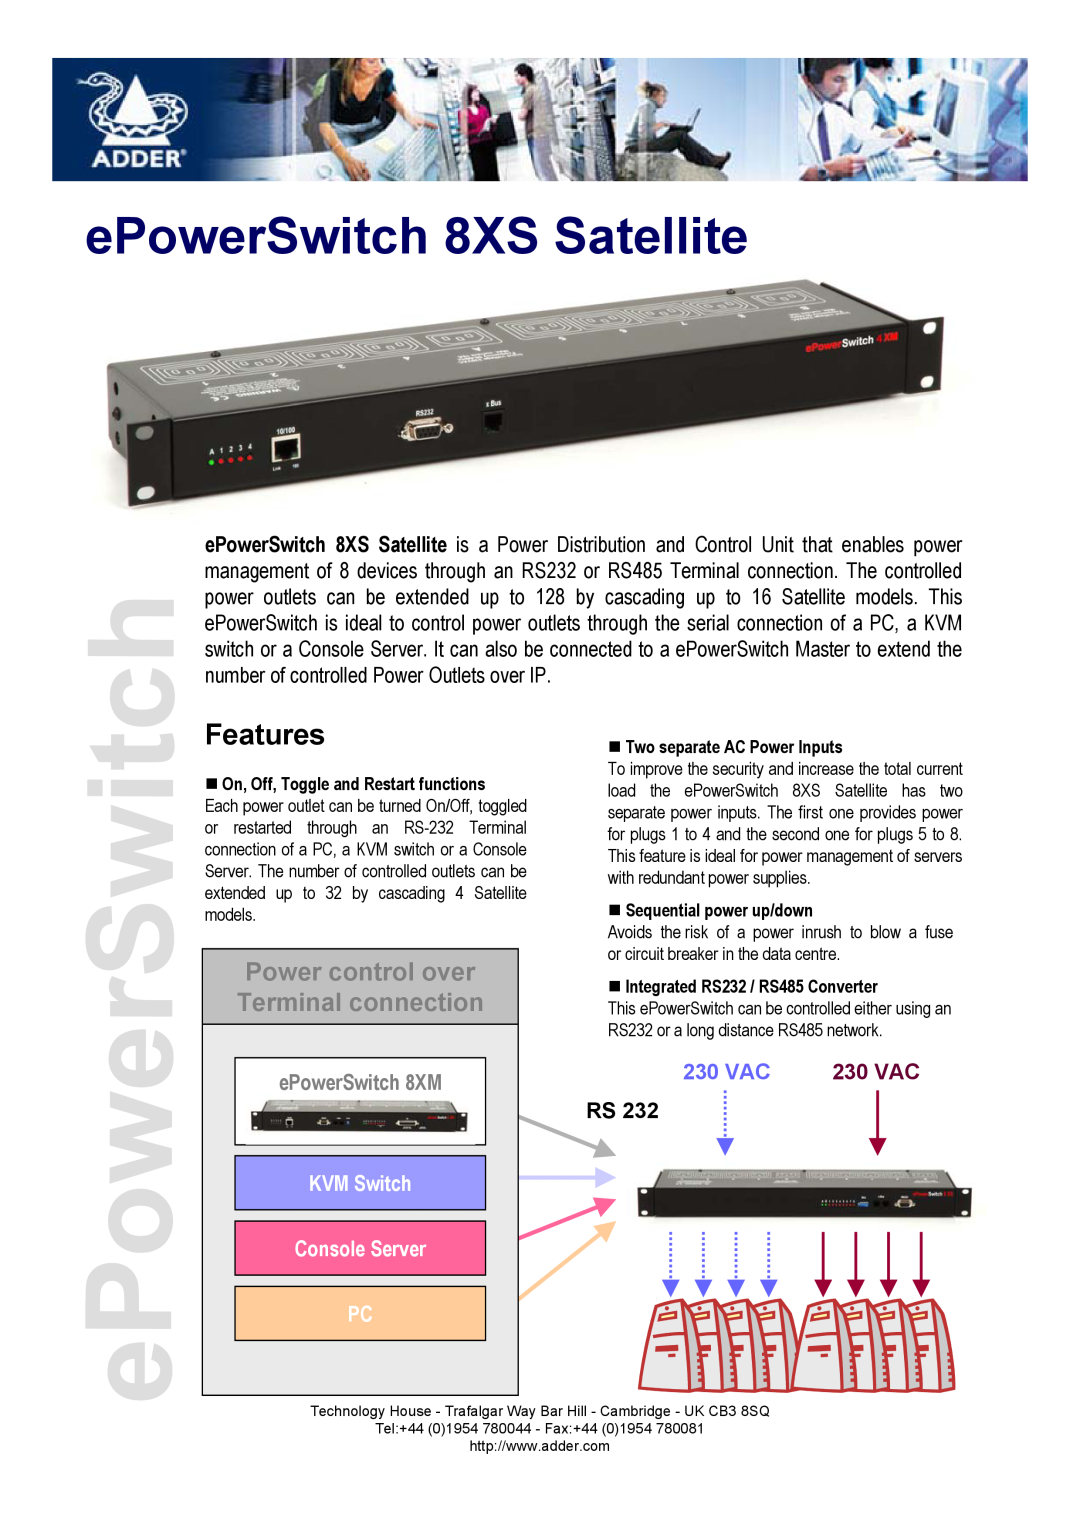 Adder Technology manual Features, ePowerSwitch 8XS Satellite, Power control over Terminal connection, ePowerSwitch 8XM 